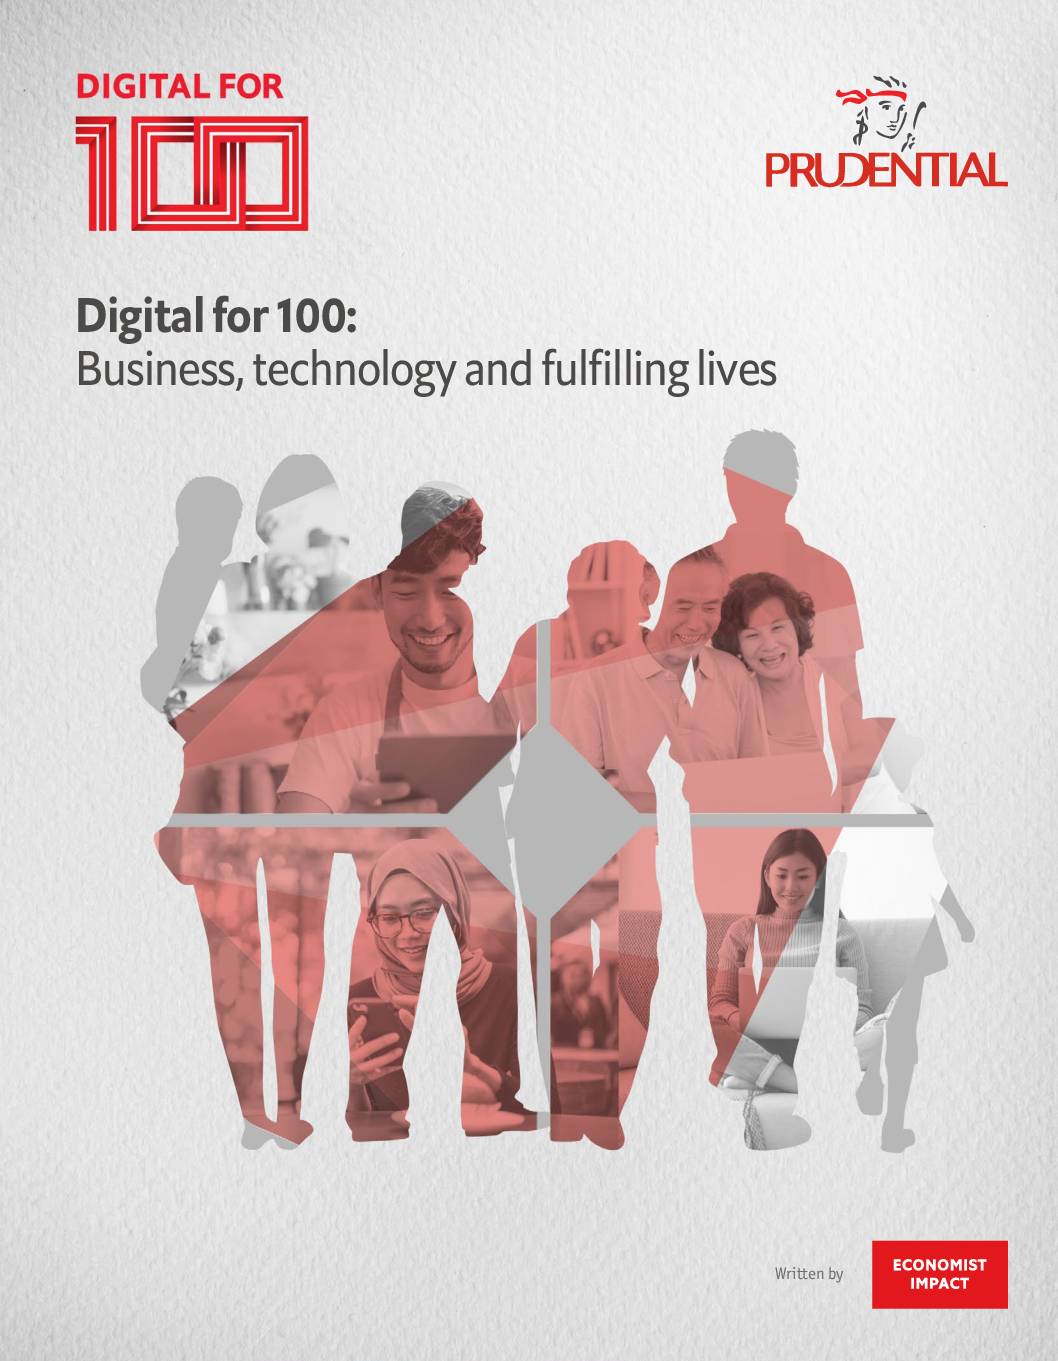 Digital-for-100-Business-technology-and-fulfilling-lives-pdf